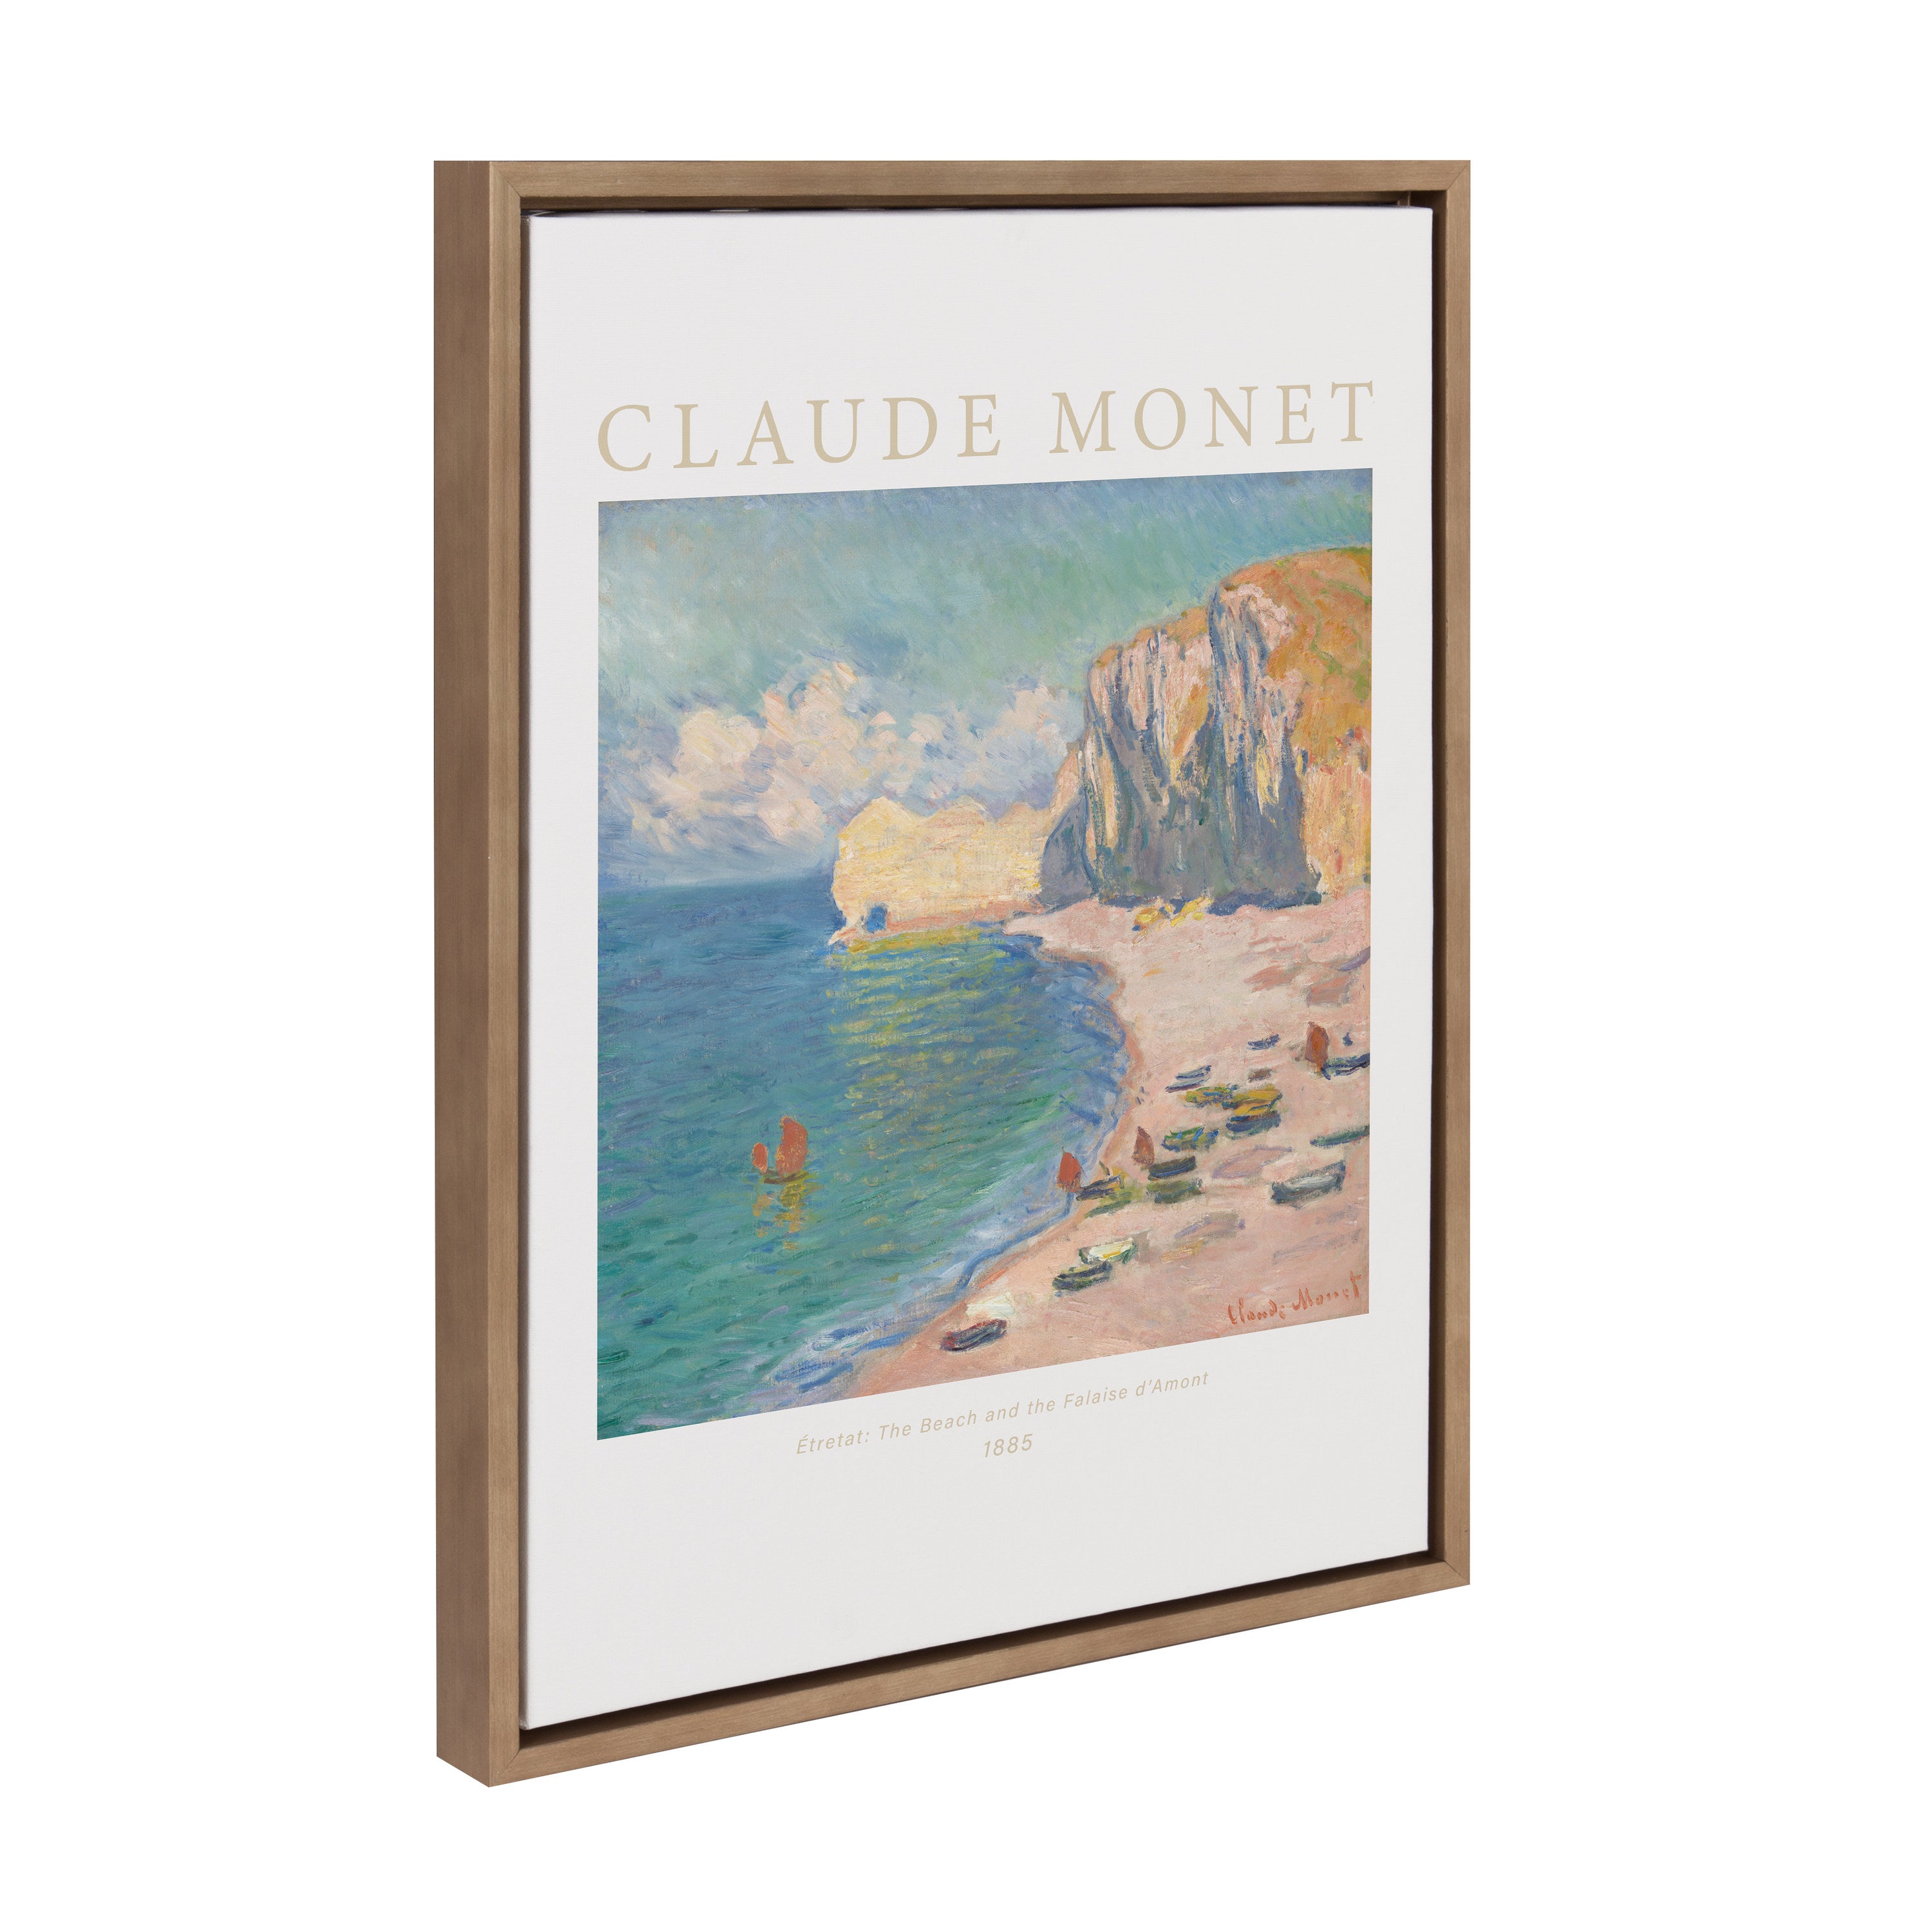 Sylvie Poster Claude Monet Étretat The Beach and the Falaise d’Amont 1885 Framed Canvas by The Art Institute of Chicago